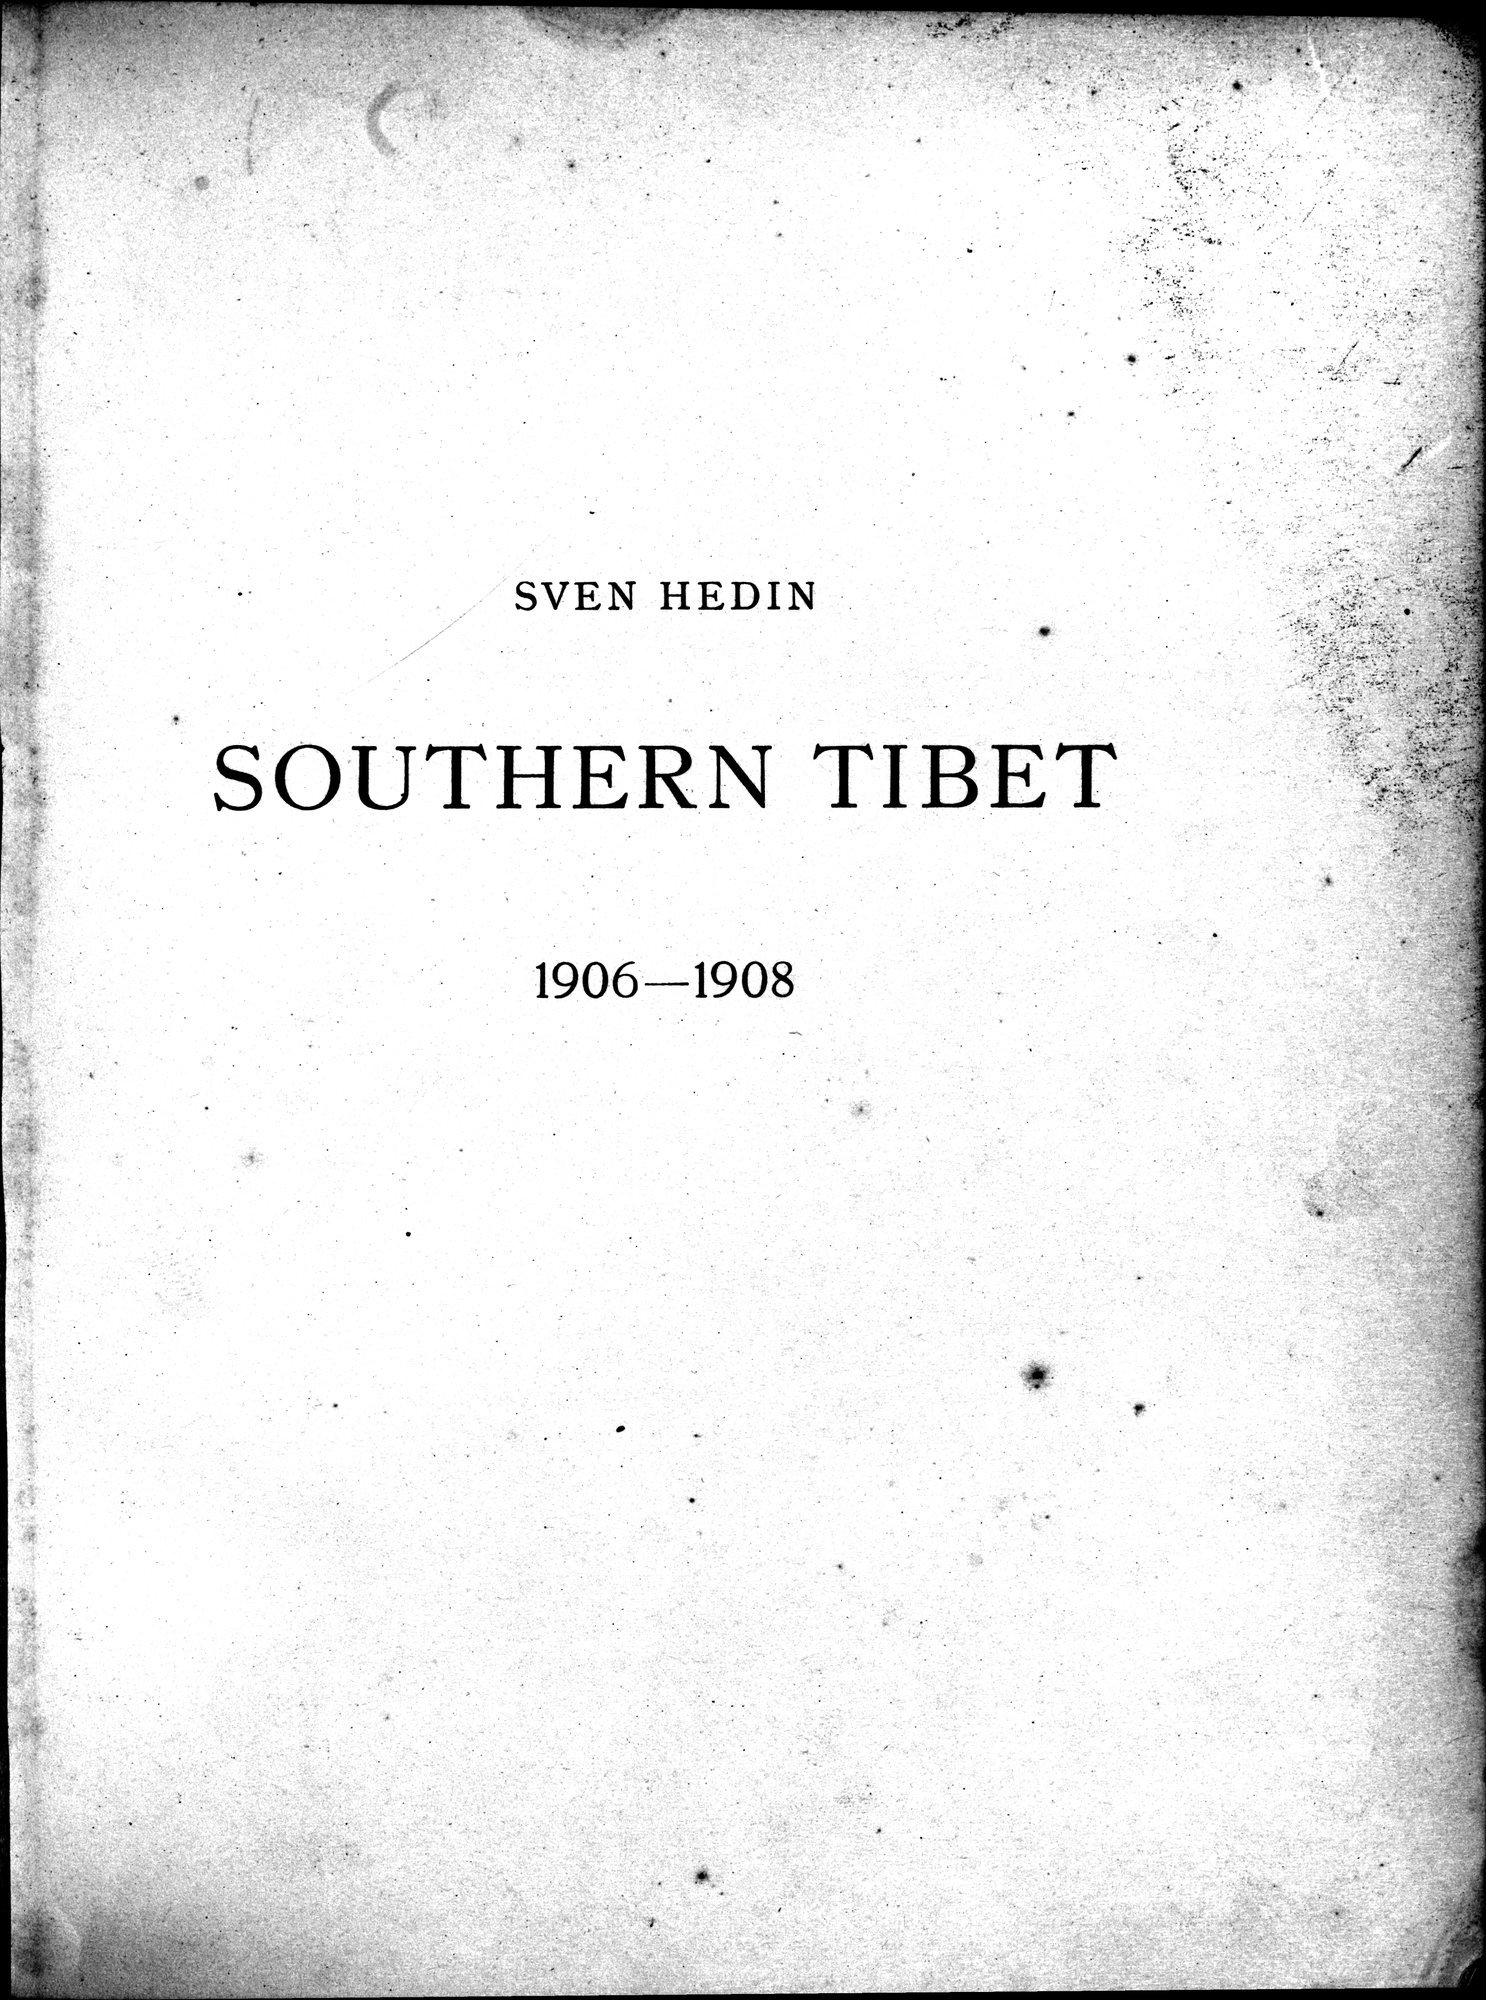 Southern Tibet : vol.9 / Page 9 (Grayscale High Resolution Image)